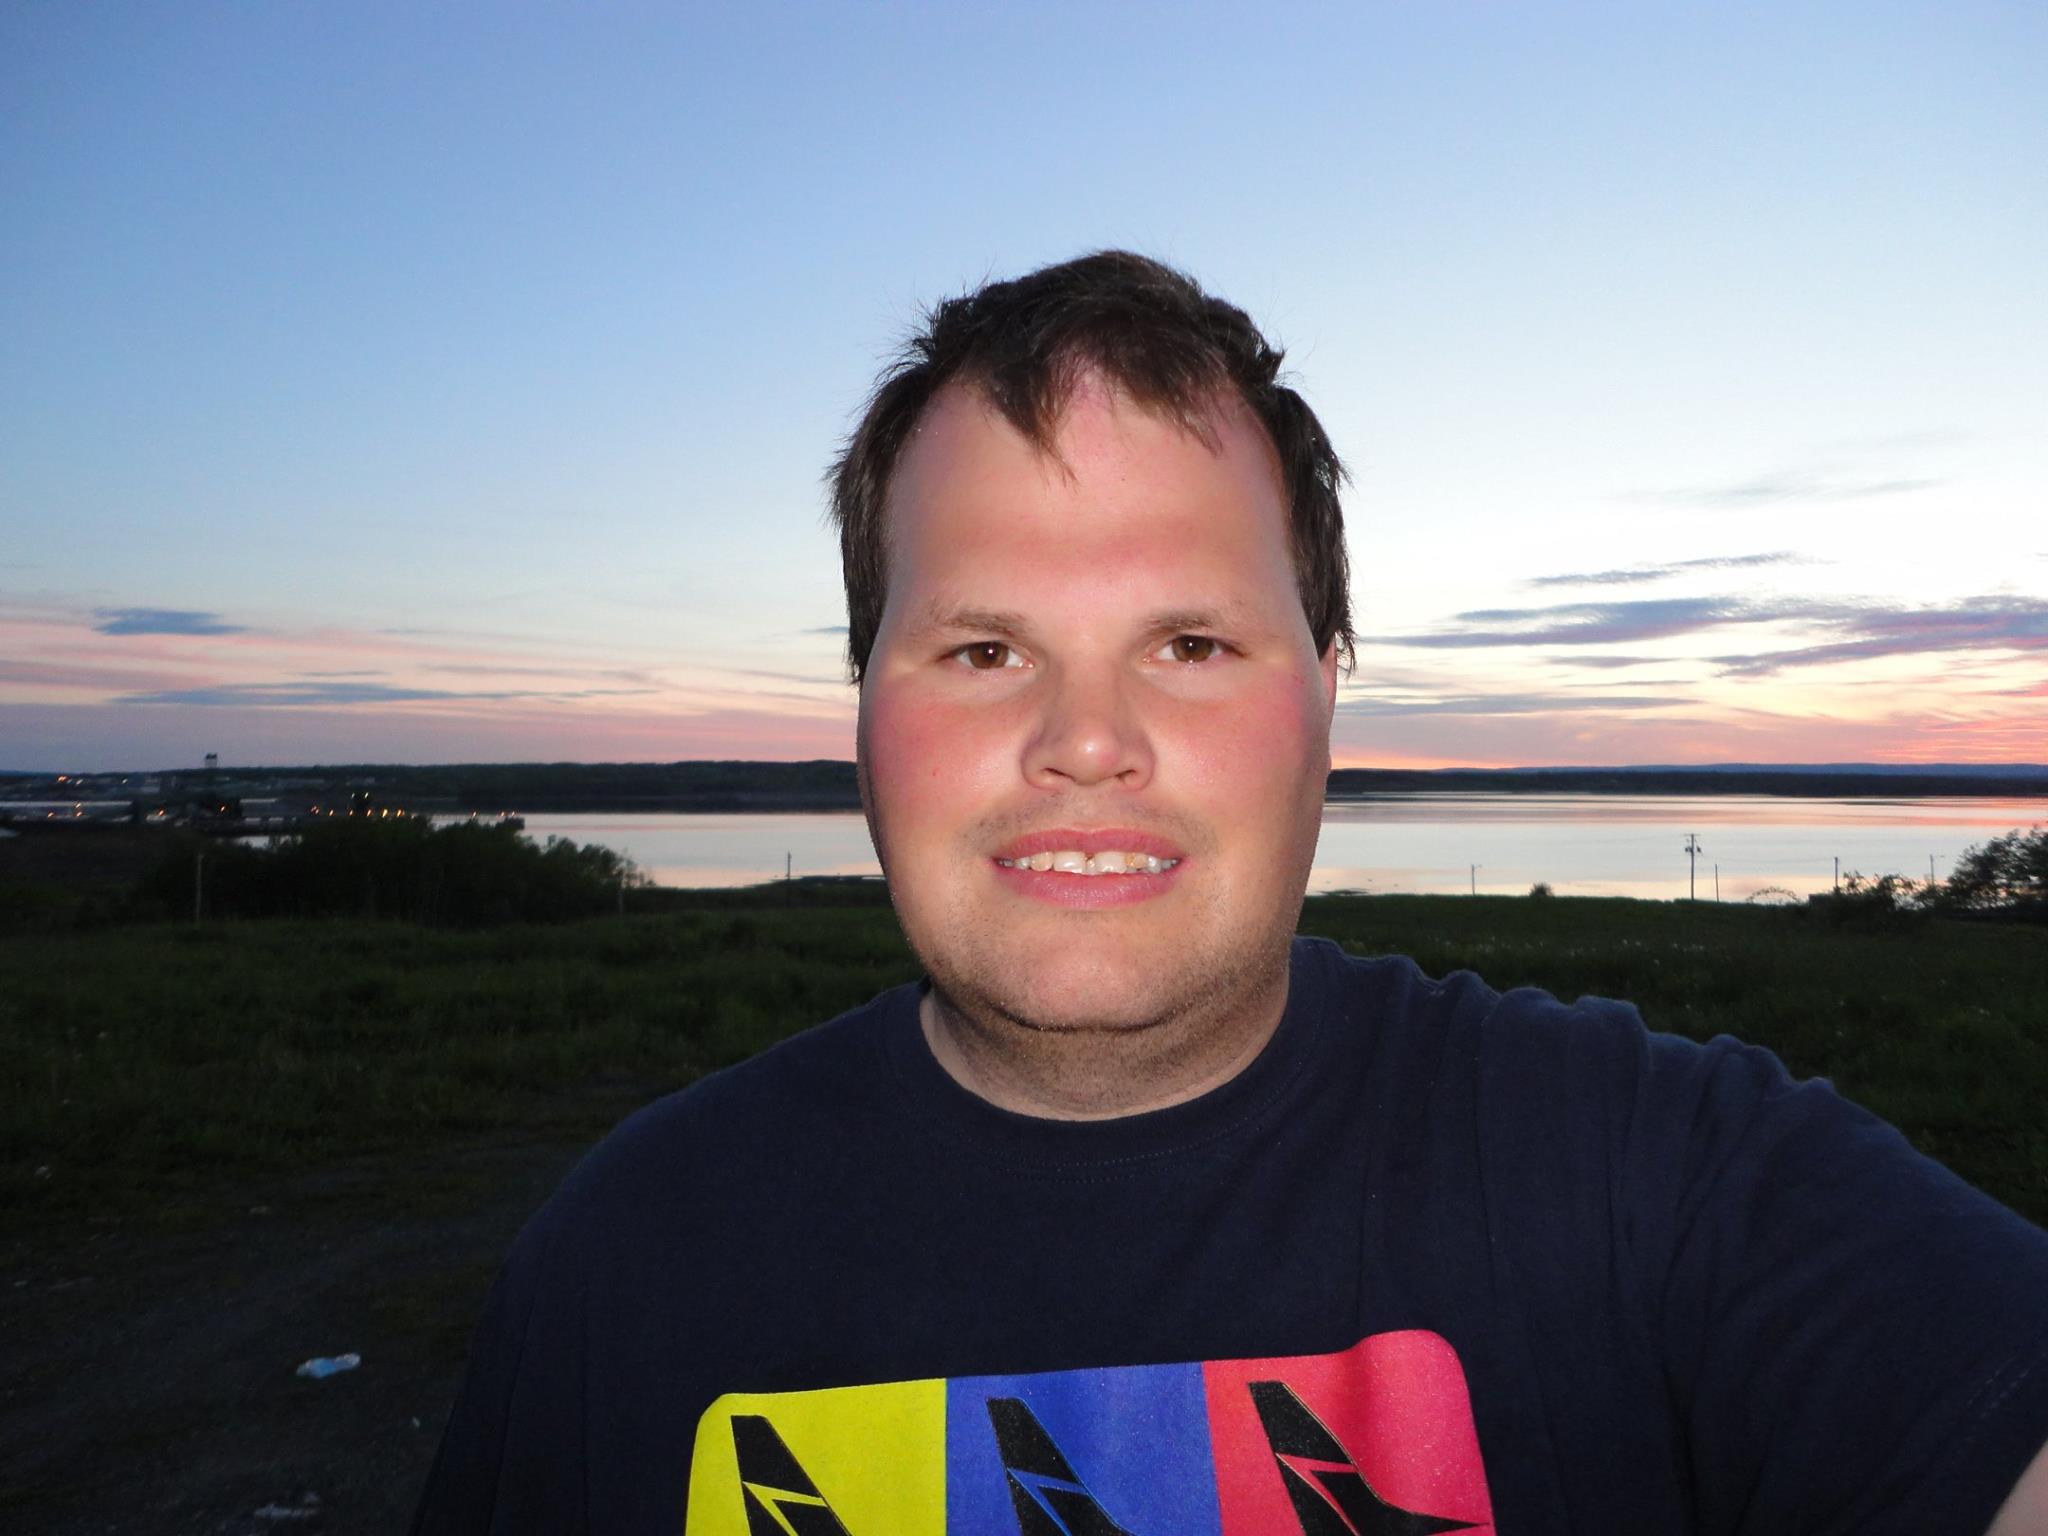 Frankie MacDonald is Enjoying the Warm Mid June Evening in Sydney Nova Scotia in the Whitney Pier Area and during the Sunset.